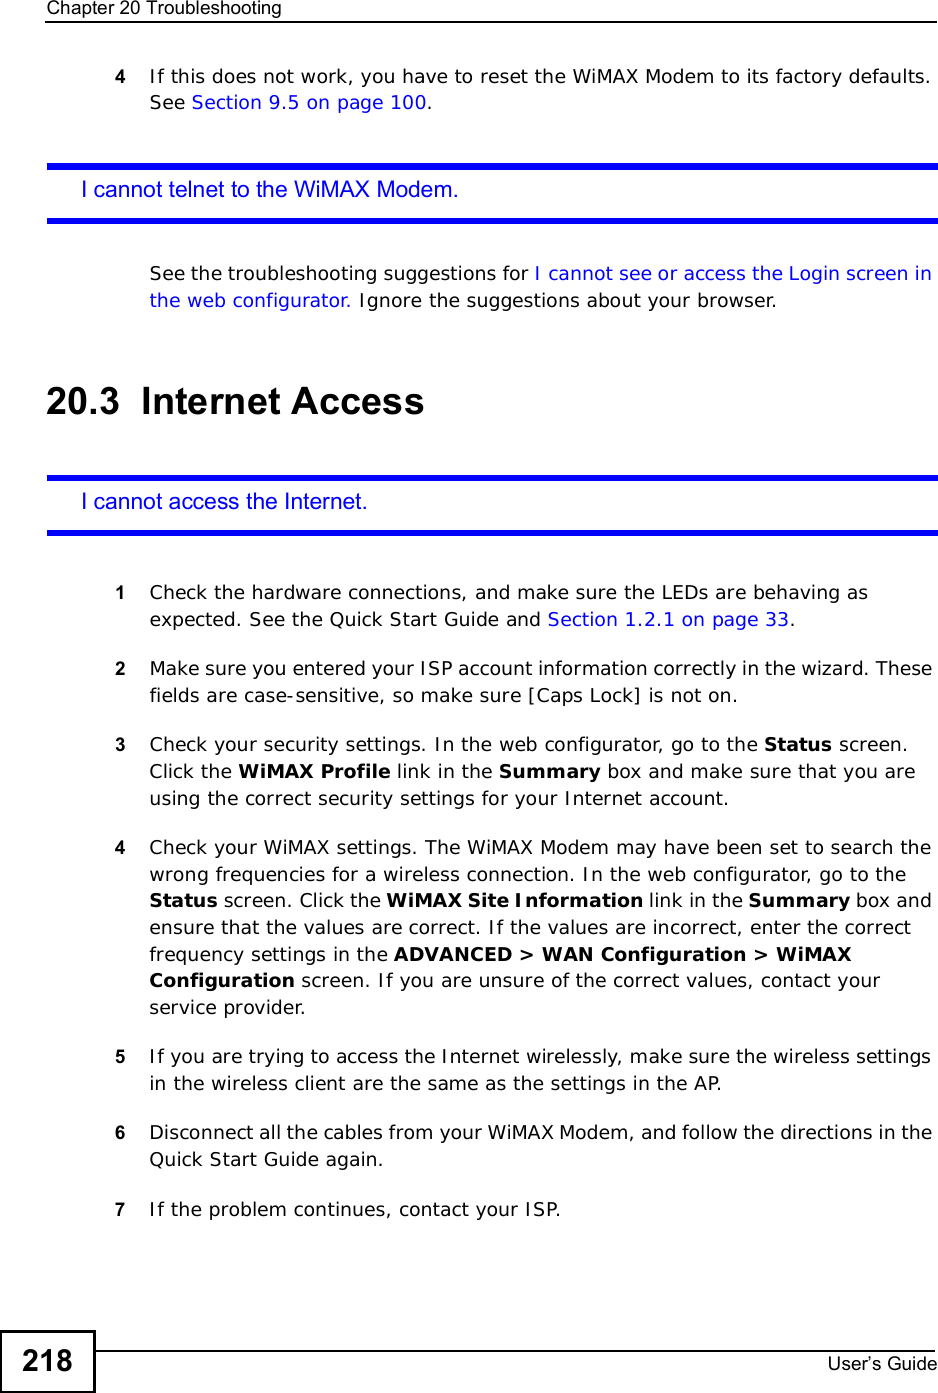 Chapter 20TroubleshootingUser s Guide2184If this does not work, you have to reset the WiMAX Modem to its factory defaults. See Section 9.5 on page 100.I cannot telnet to the WiMAX Modem.See the troubleshooting suggestions for I cannot see or access the Login screen in the web configurator. Ignore the suggestions about your browser.20.3  Internet AccessI cannot access the Internet.1Check the hardware connections, and make sure the LEDs are behaving as expected. See the Quick Start Guide and Section 1.2.1 on page 33.2Make sure you entered your ISP account information correctly in the wizard. These fields are case-sensitive, so make sure [Caps Lock] is not on.3Check your security settings. In the web configurator, go to the Status screen. Click the WiMAX Profile link in the Summary box and make sure that you are using the correct security settings for your Internet account.4Check your WiMAX settings. The WiMAX Modem may have been set to search the wrong frequencies for a wireless connection. In the web configurator, go to the Status screen. Click the WiMAX Site Information link in the Summary box and ensure that the values are correct. If the values are incorrect, enter the correct frequency settings in the ADVANCED &gt; WAN Configuration &gt; WiMAX Configuration screen. If you are unsure of the correct values, contact your service provider.5If you are trying to access the Internet wirelessly, make sure the wireless settings in the wireless client are the same as the settings in the AP.6Disconnect all the cables from your WiMAX Modem, and follow the directions in the Quick Start Guide again.7If the problem continues, contact your ISP.